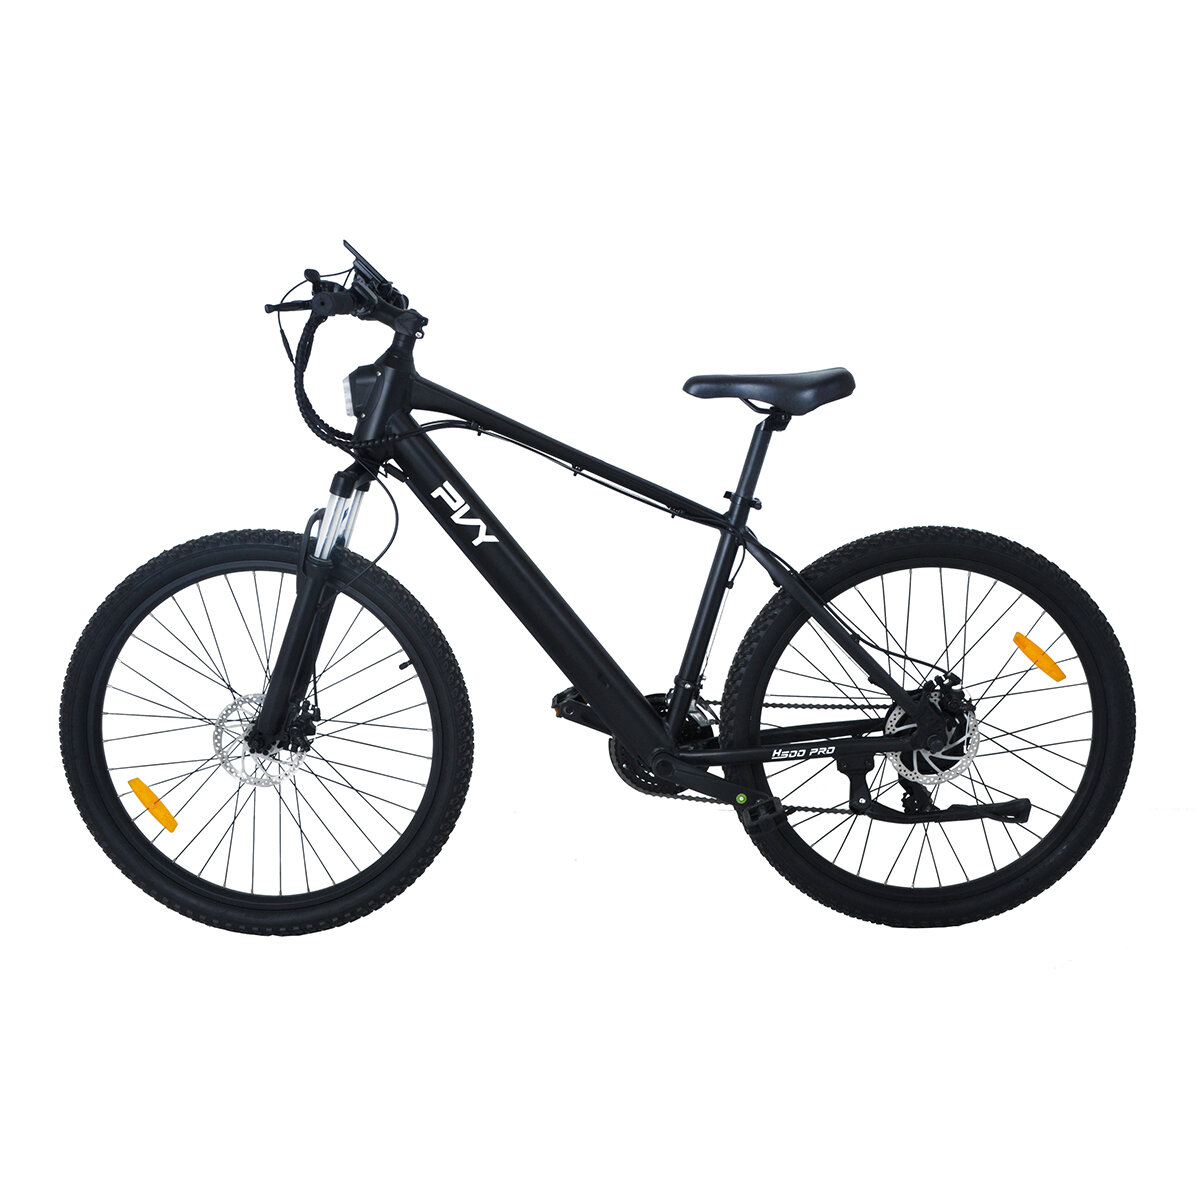 best price,pvy,h500,36v,10.4ah,350w,27.5inch,electric,bicycle,eu,coupon,price,discount